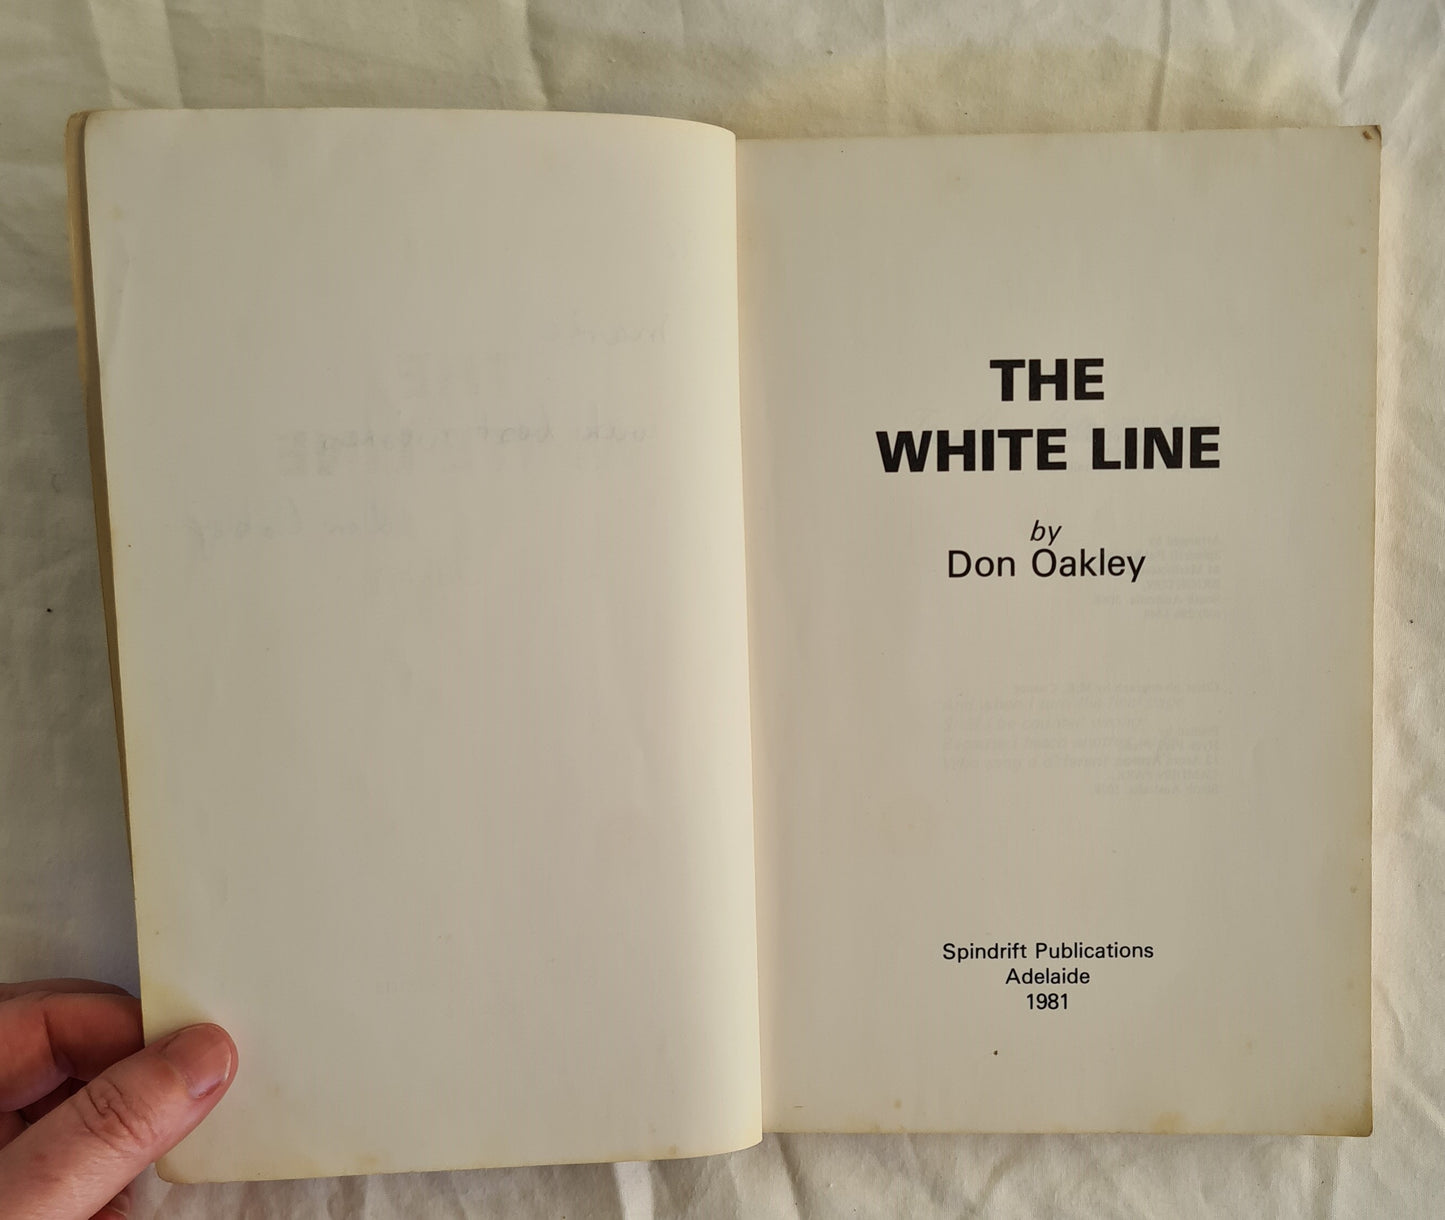 The White Line by Don Oakley